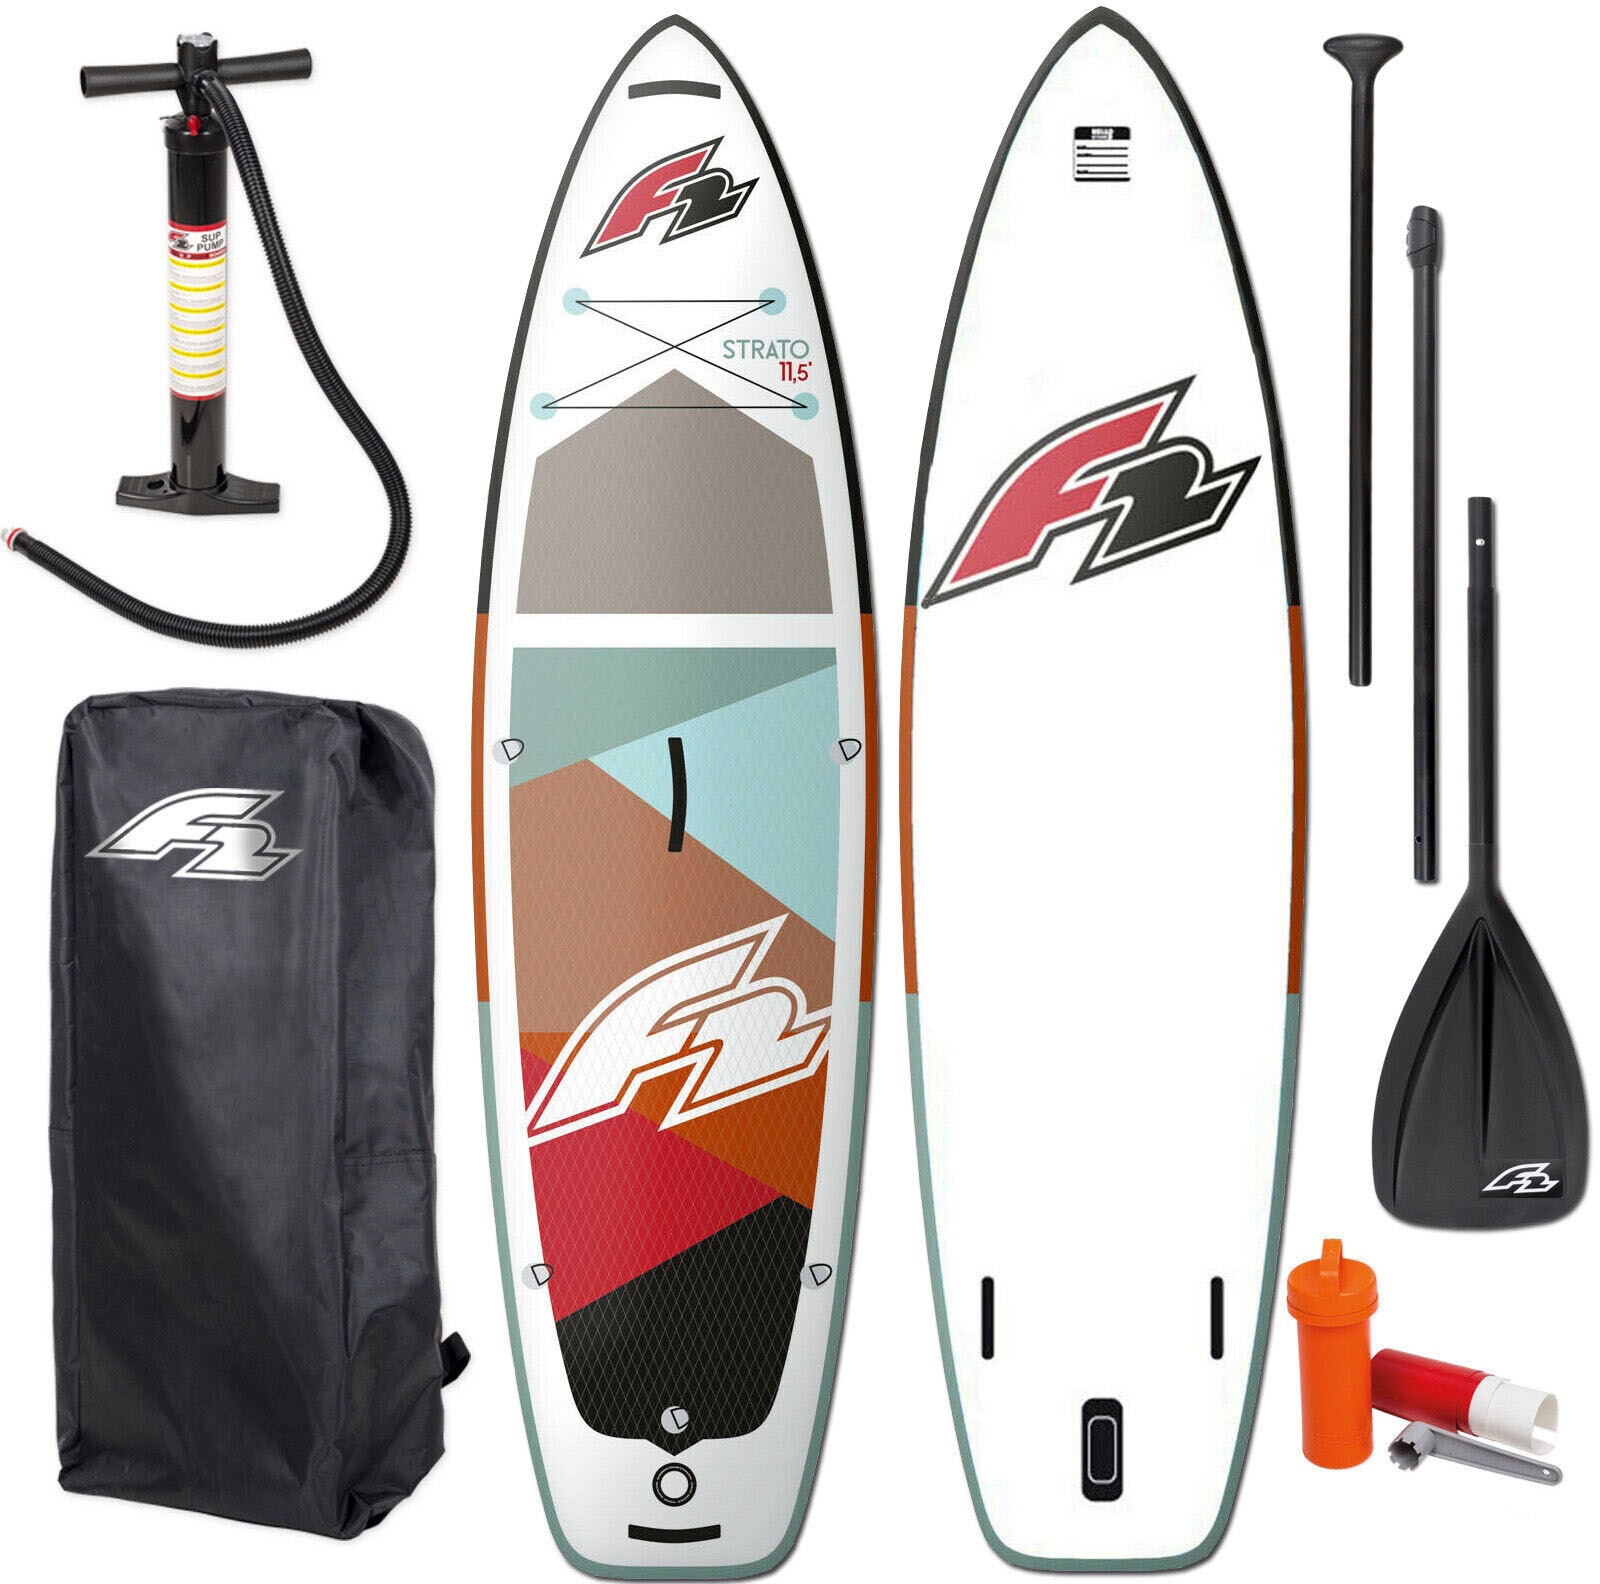 F2 Inflatable SUP-Board »Strato OTTO women Shop kaufen 10,5 im (Packung, Online red«, 5 tlg.)